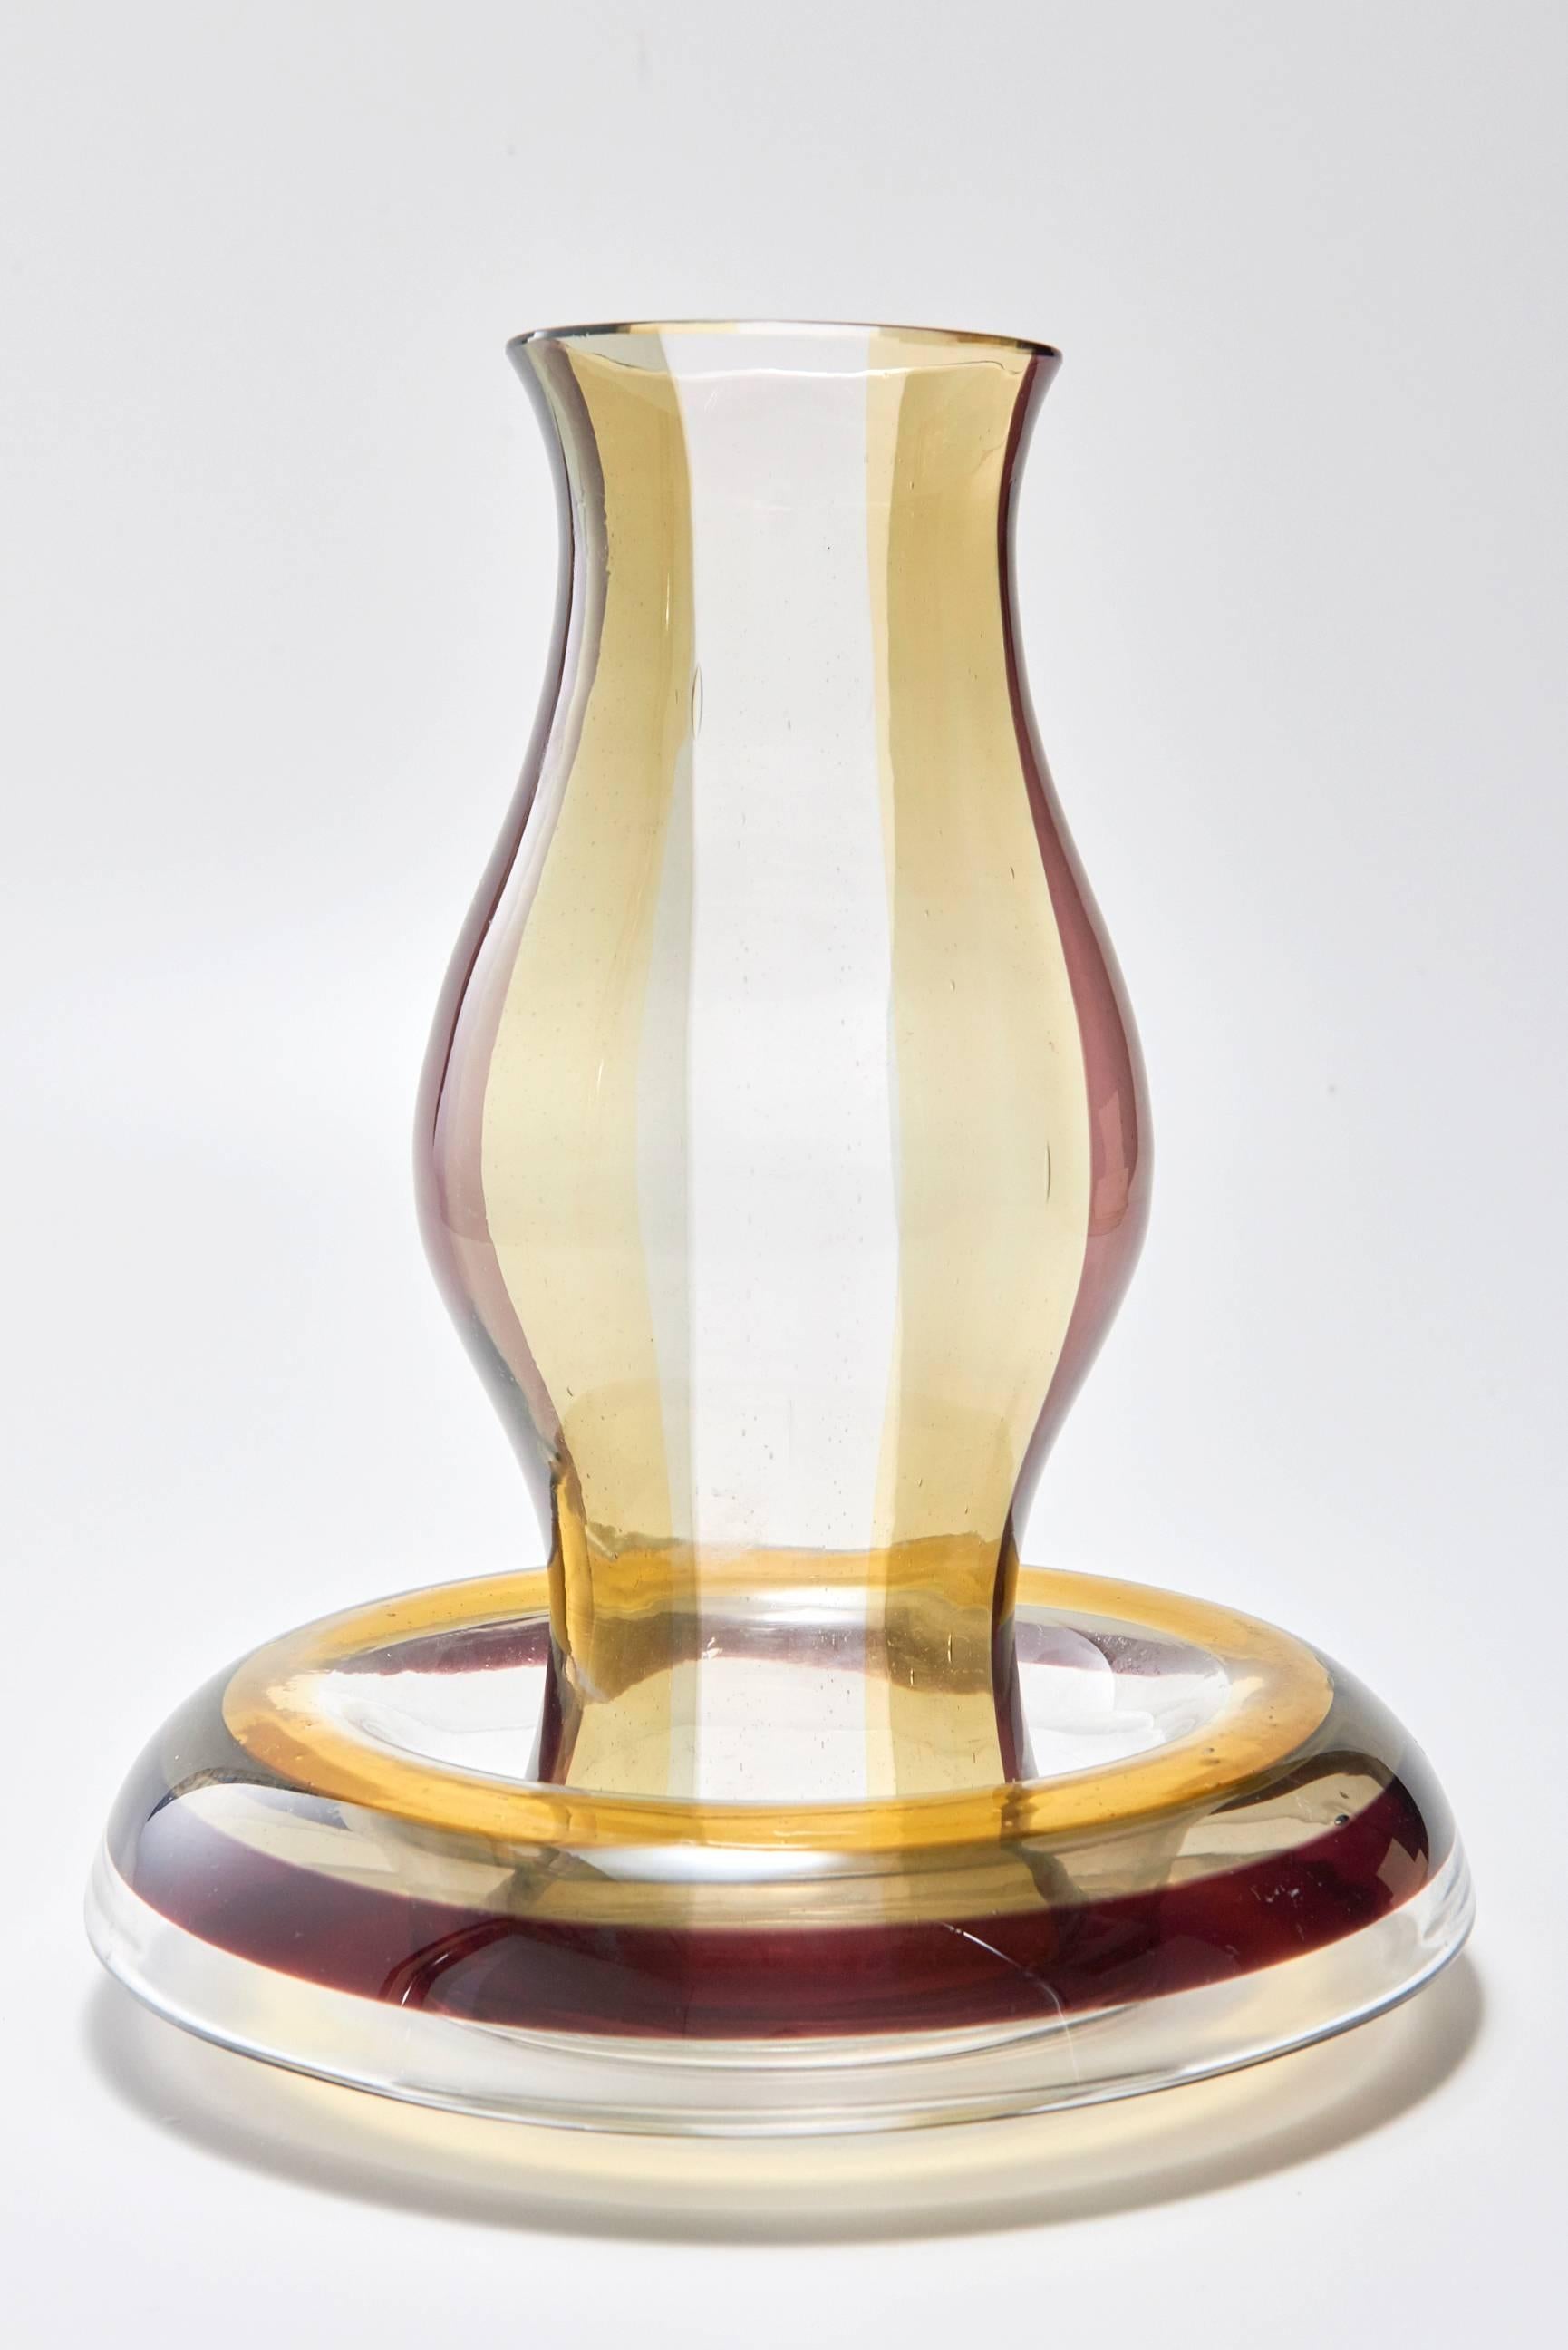 Rare 'A Fasche' hurricane lamp with original candleholder, designed by Italian master Fulvio Bianconi for the legendary Murano glassmaker Venini in the 1950s.

Rarely seen with the original holder, this piece is in excellent condition, with only